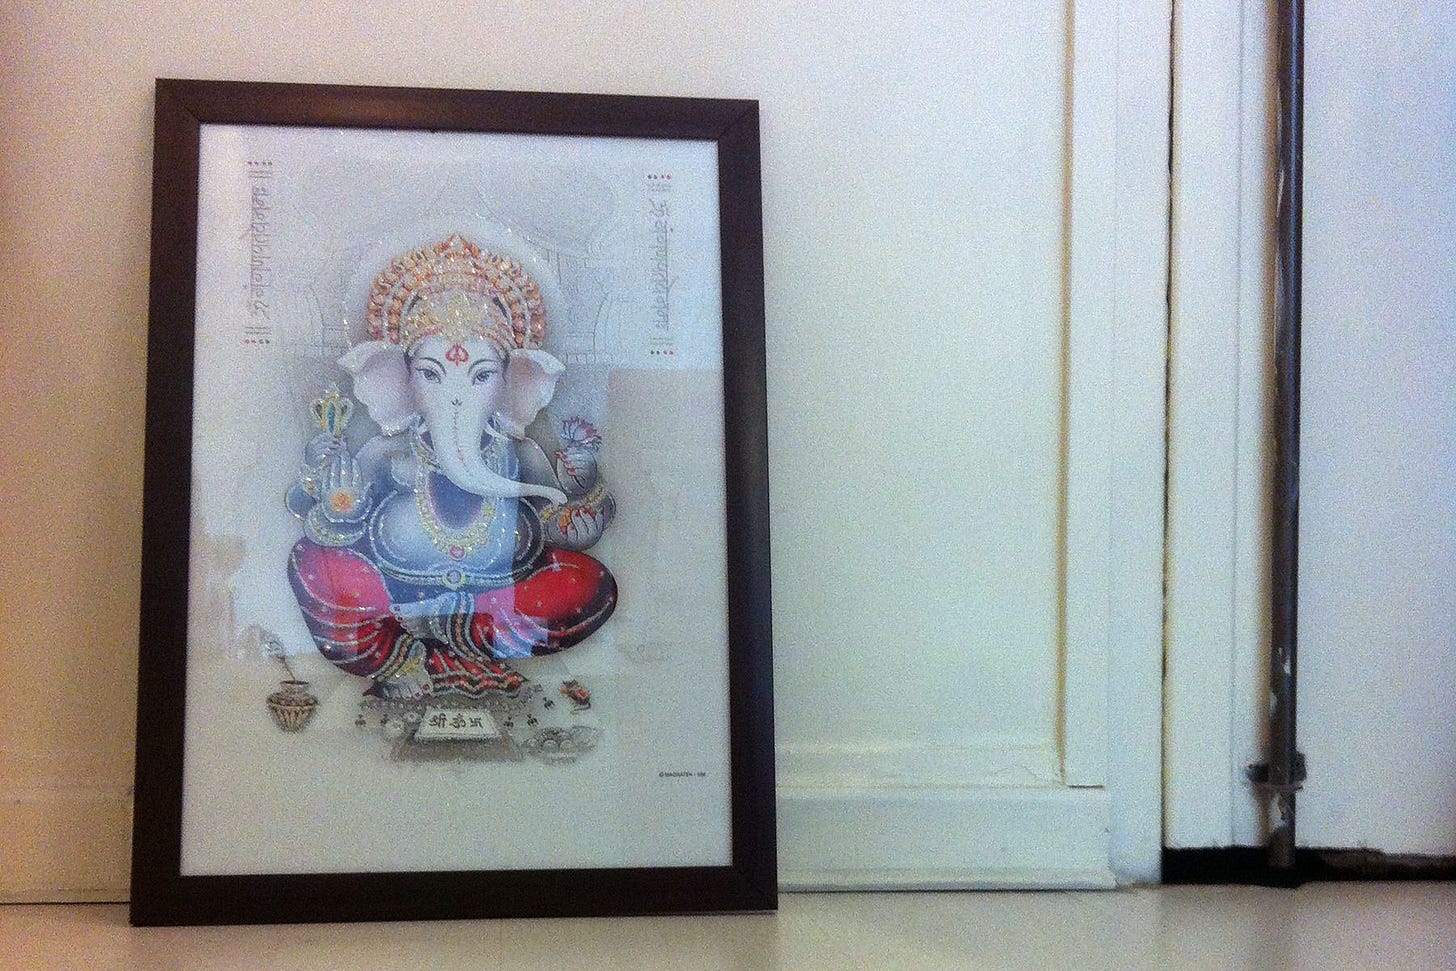 Ganesh guards the threshold of a yoga studio in Paris, France